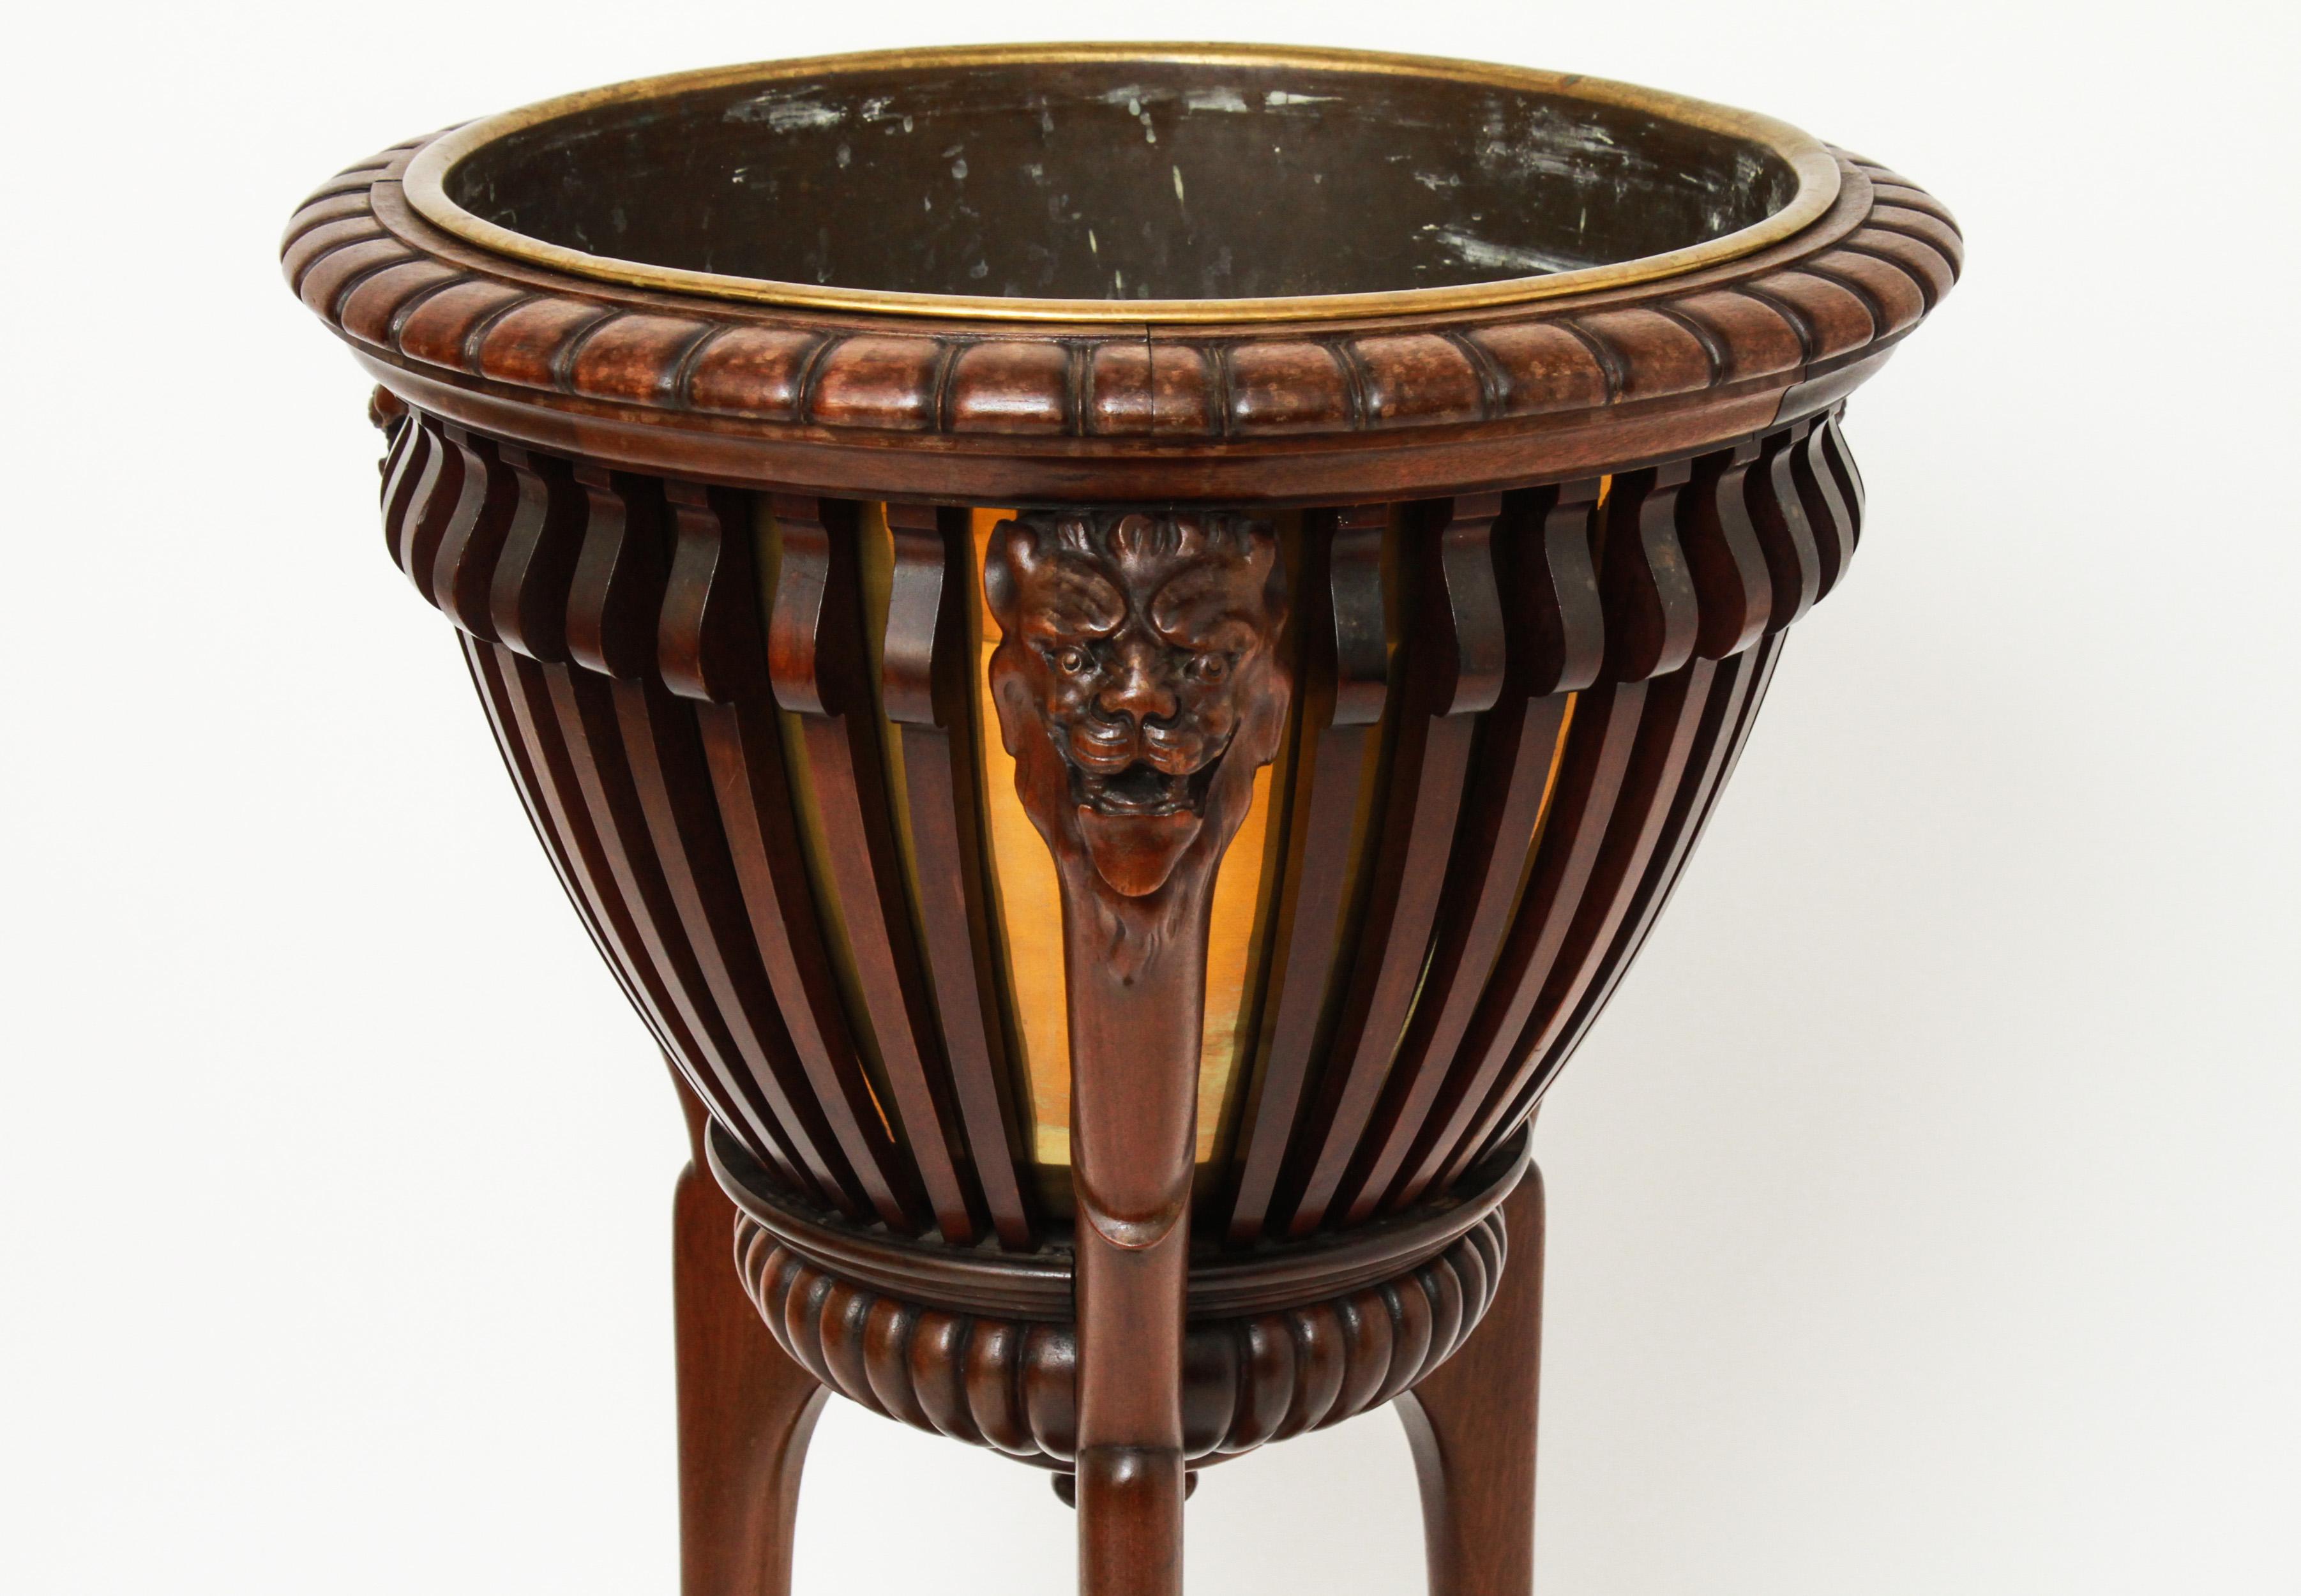 Neoclassical style hardwood jardinière with lion head motif. The piece has a carved top with snarling lion mask supports, interior fitted with a metal liner and rising on three cabriole legs conjoined by a lower shelf and terminating in paw feet. In